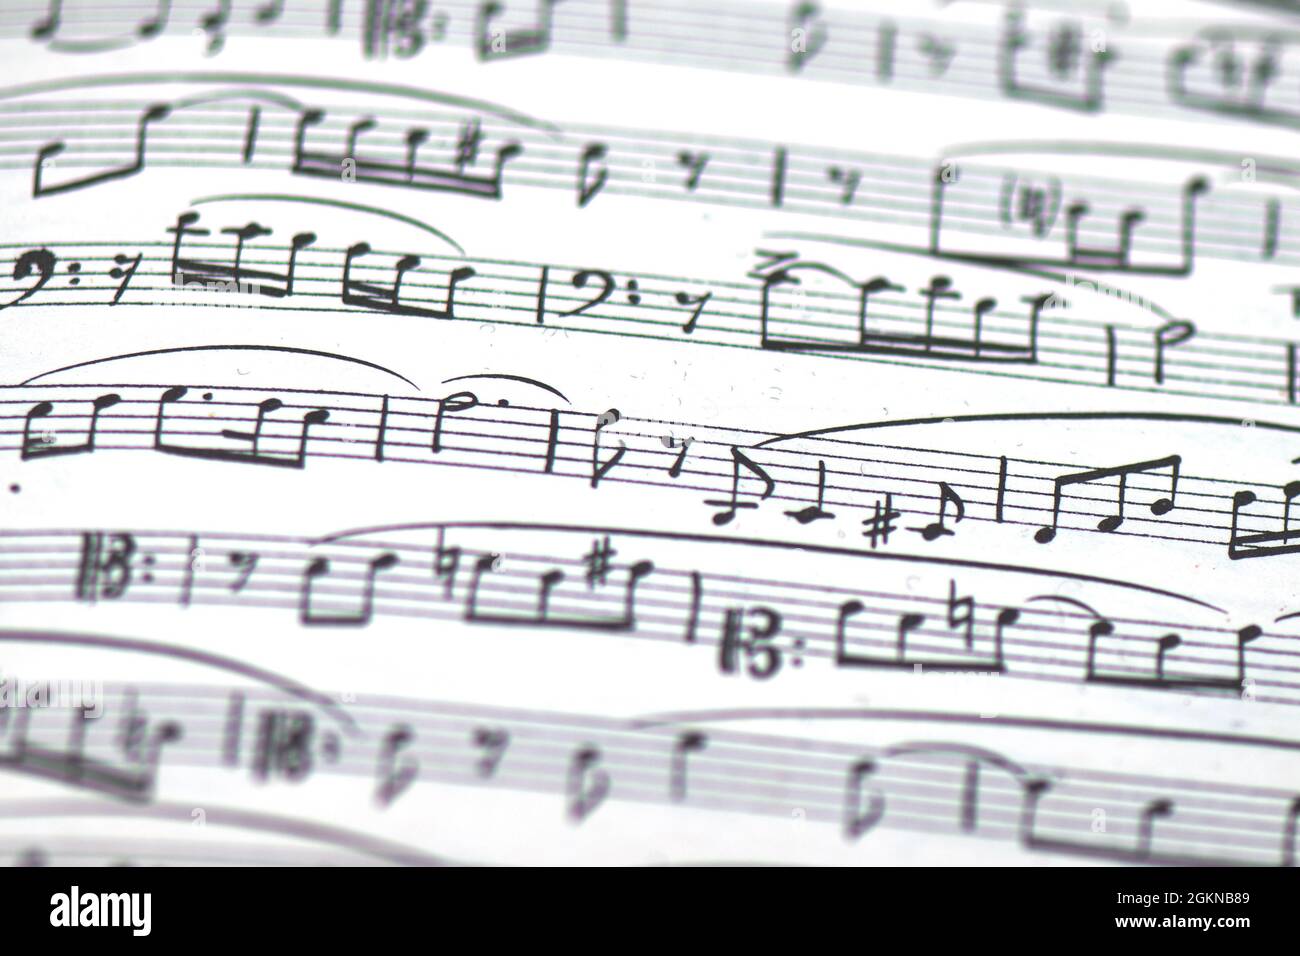 Detail of musical score Stock Photo